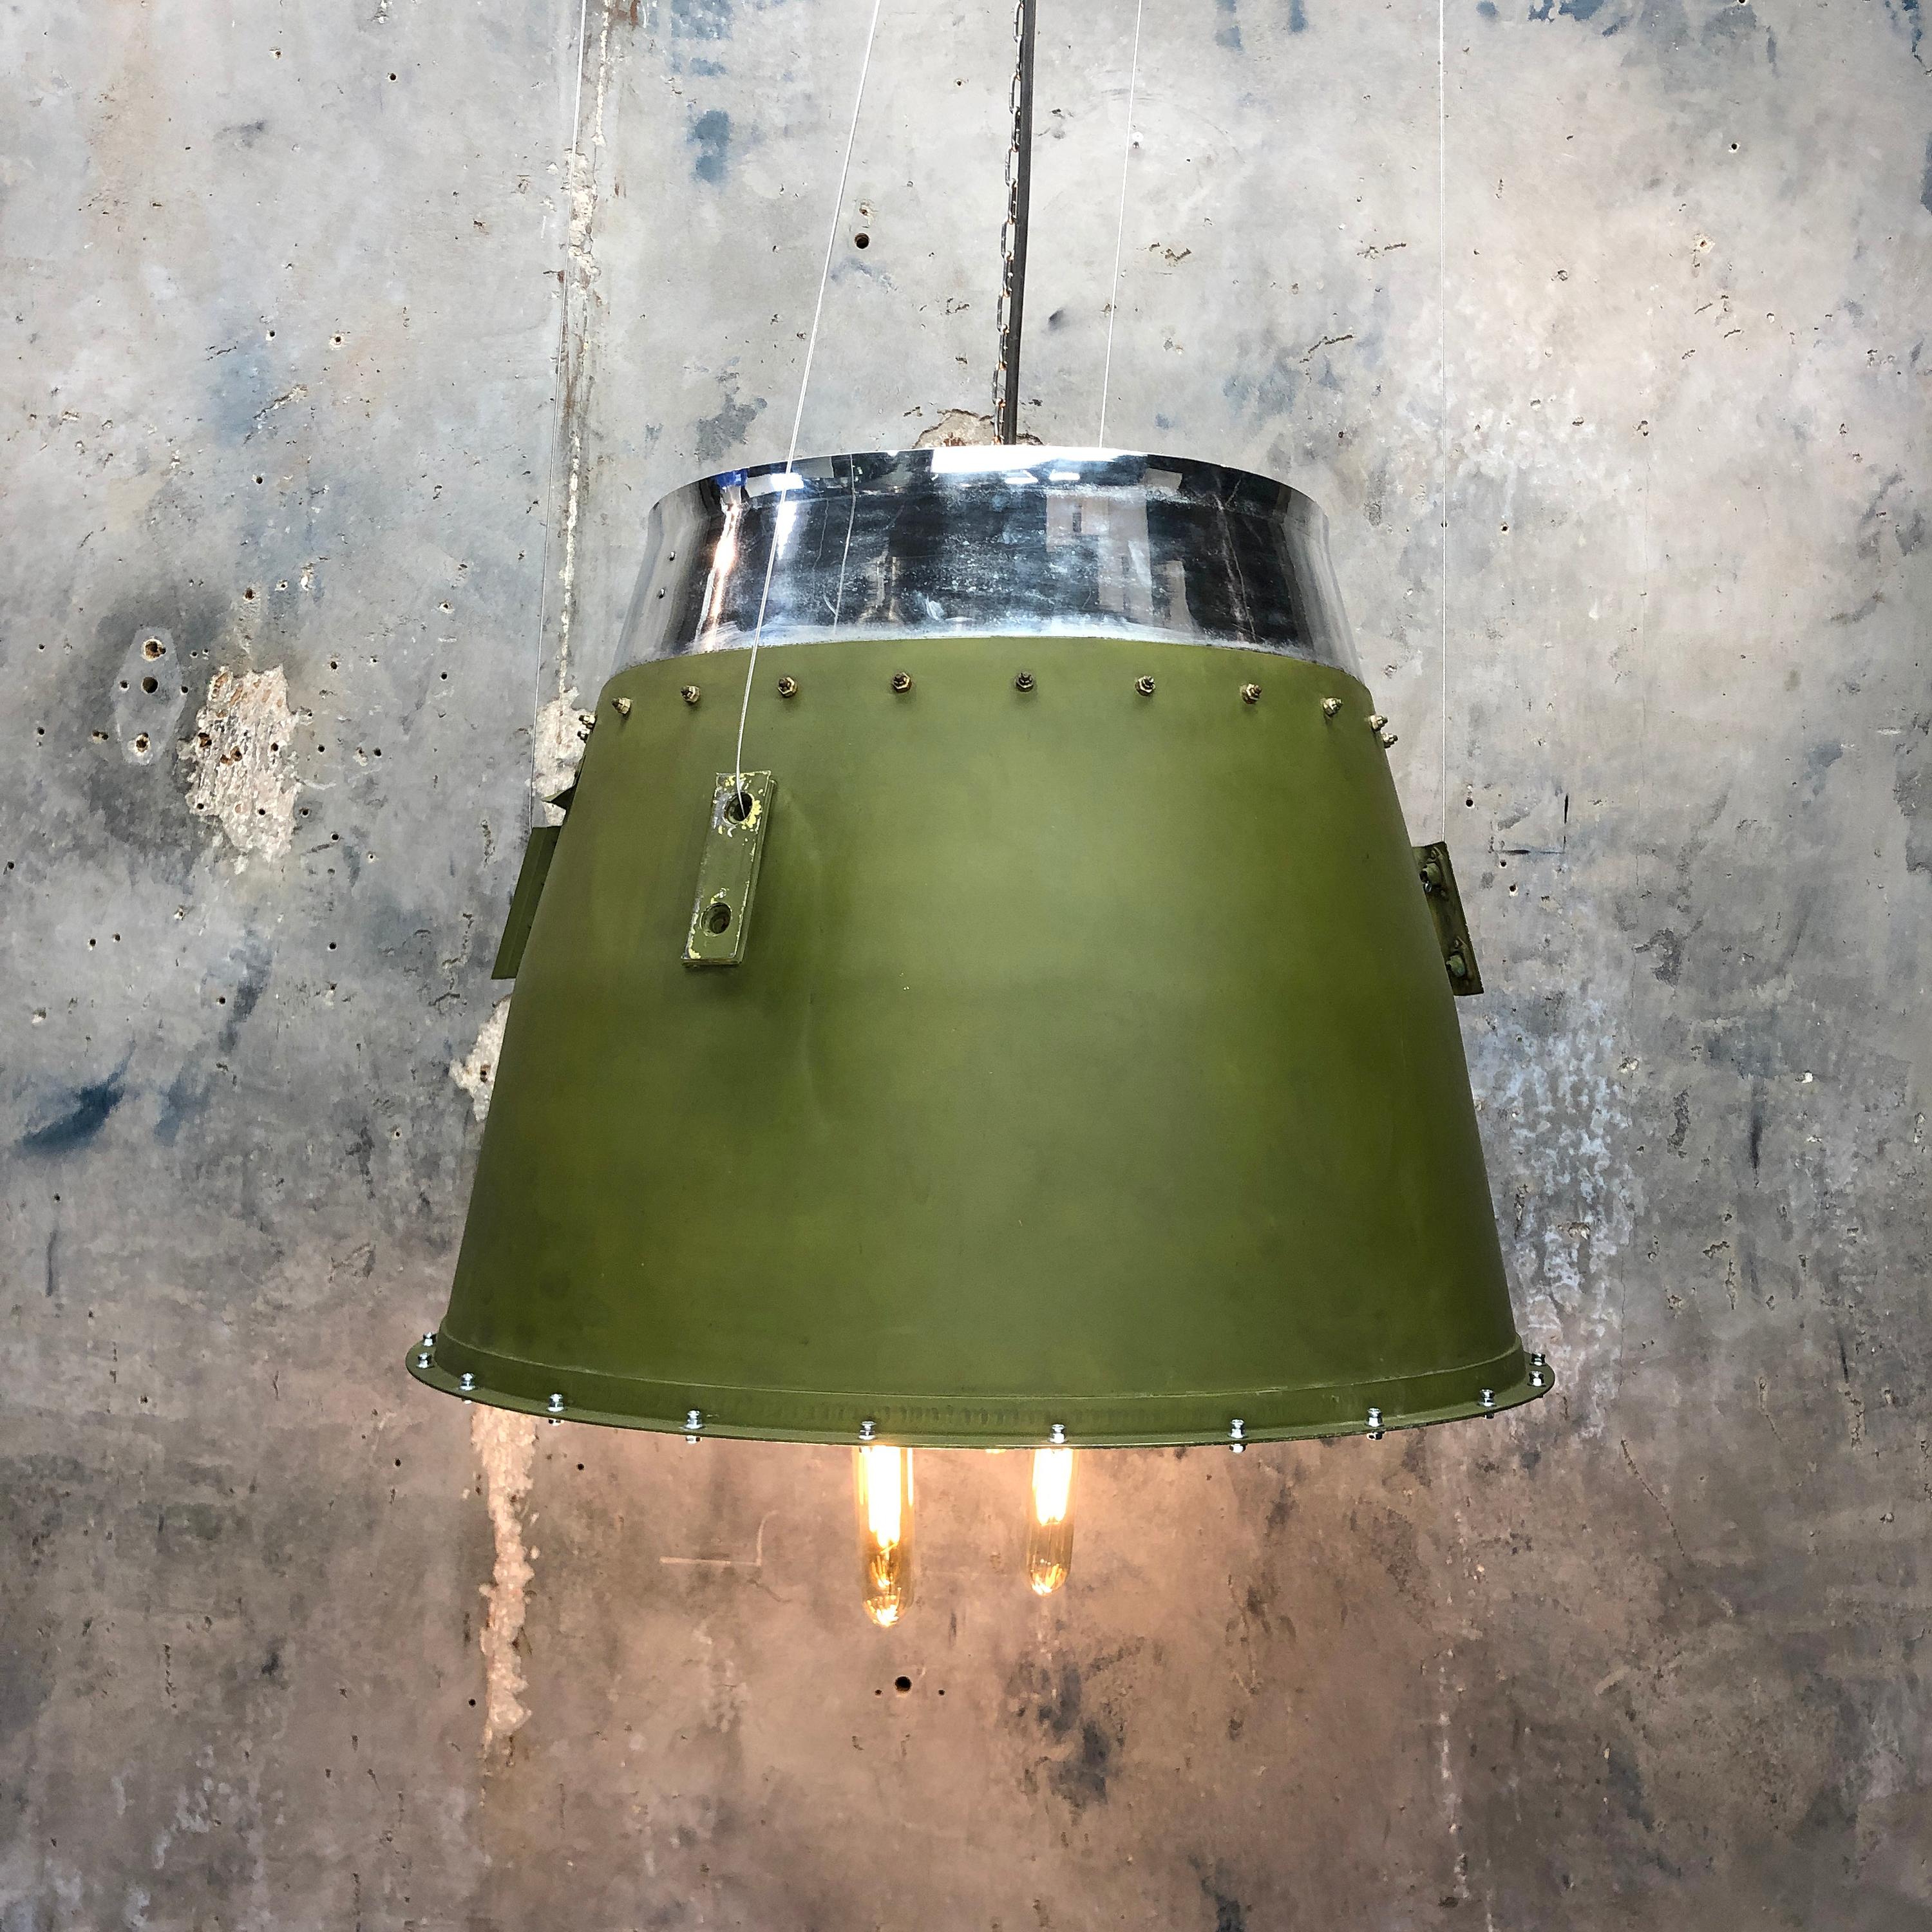 Aluminum 1980s Canadian Bombardier Jet Engine Cowling, Green Industrial Pendant Light